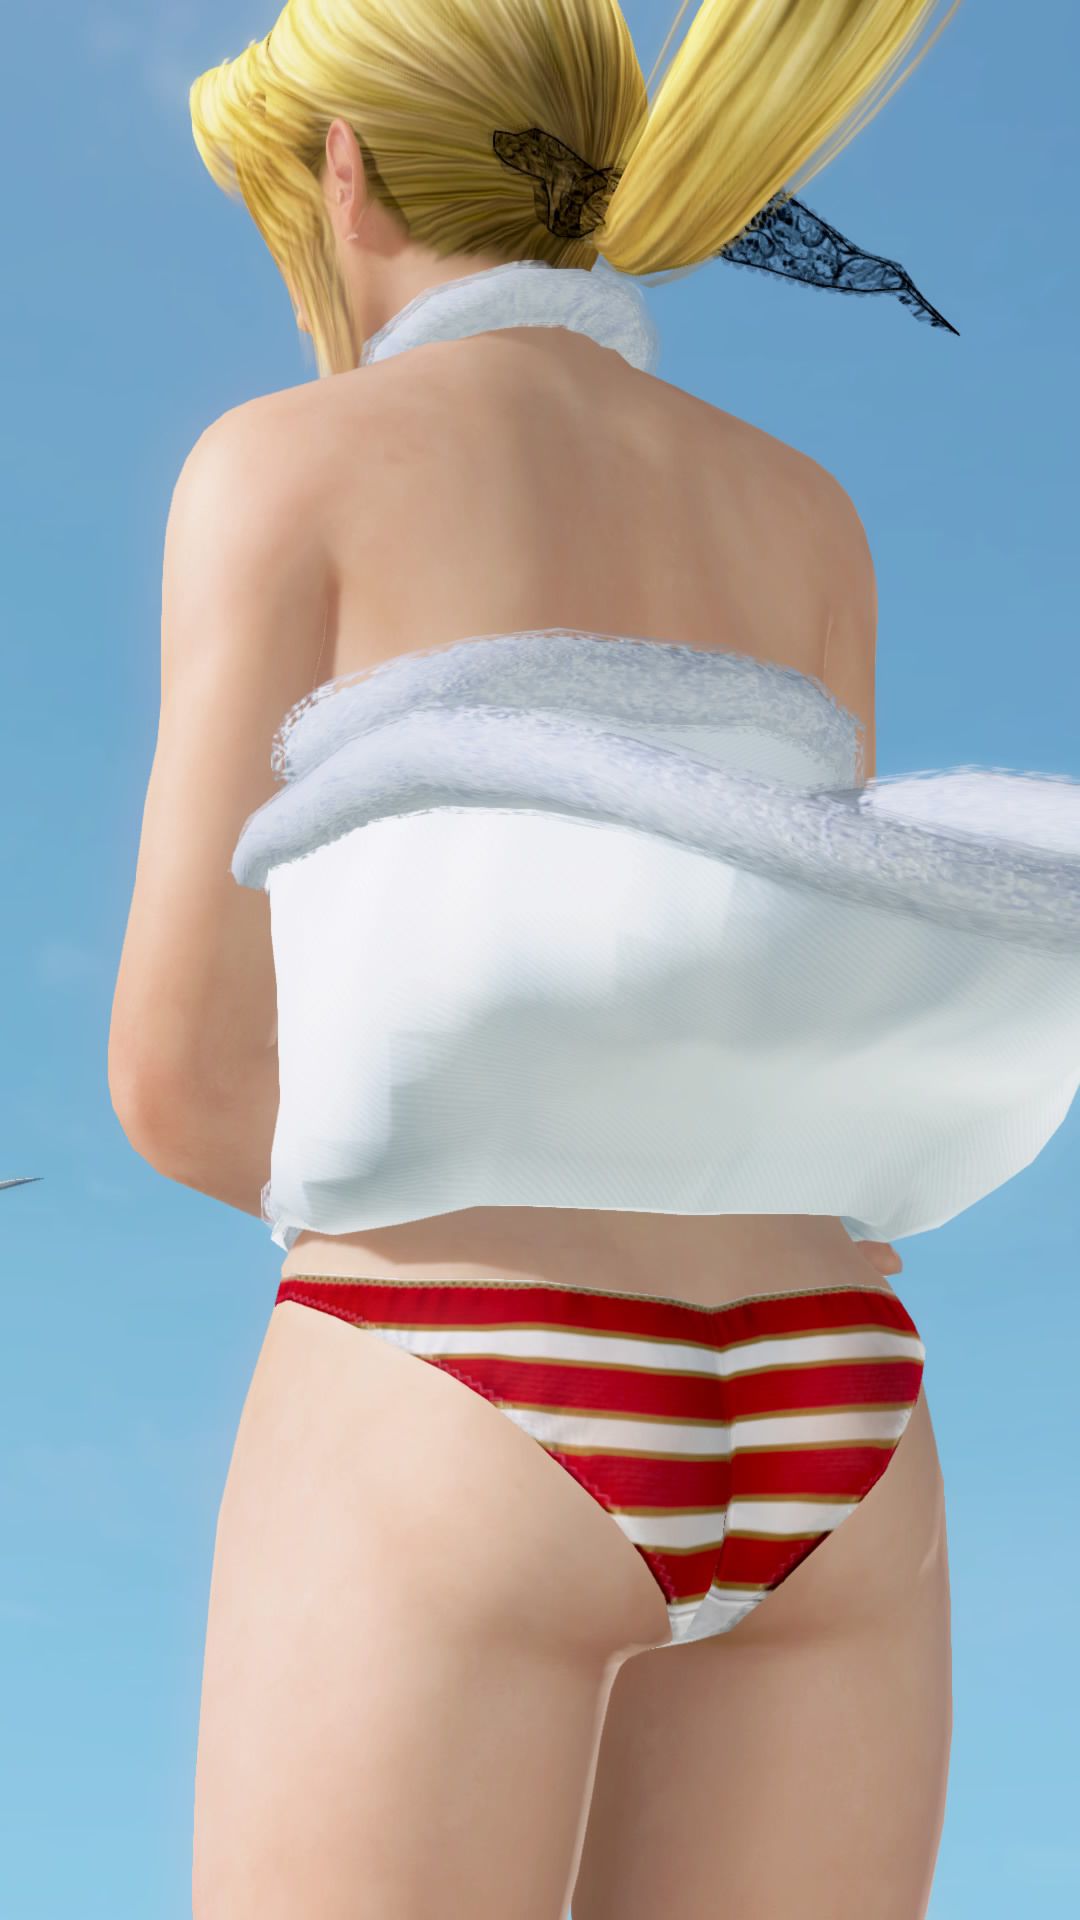 Merry Xmas from DOAX3 South Island! Photo session with new swimsuit Santa 21